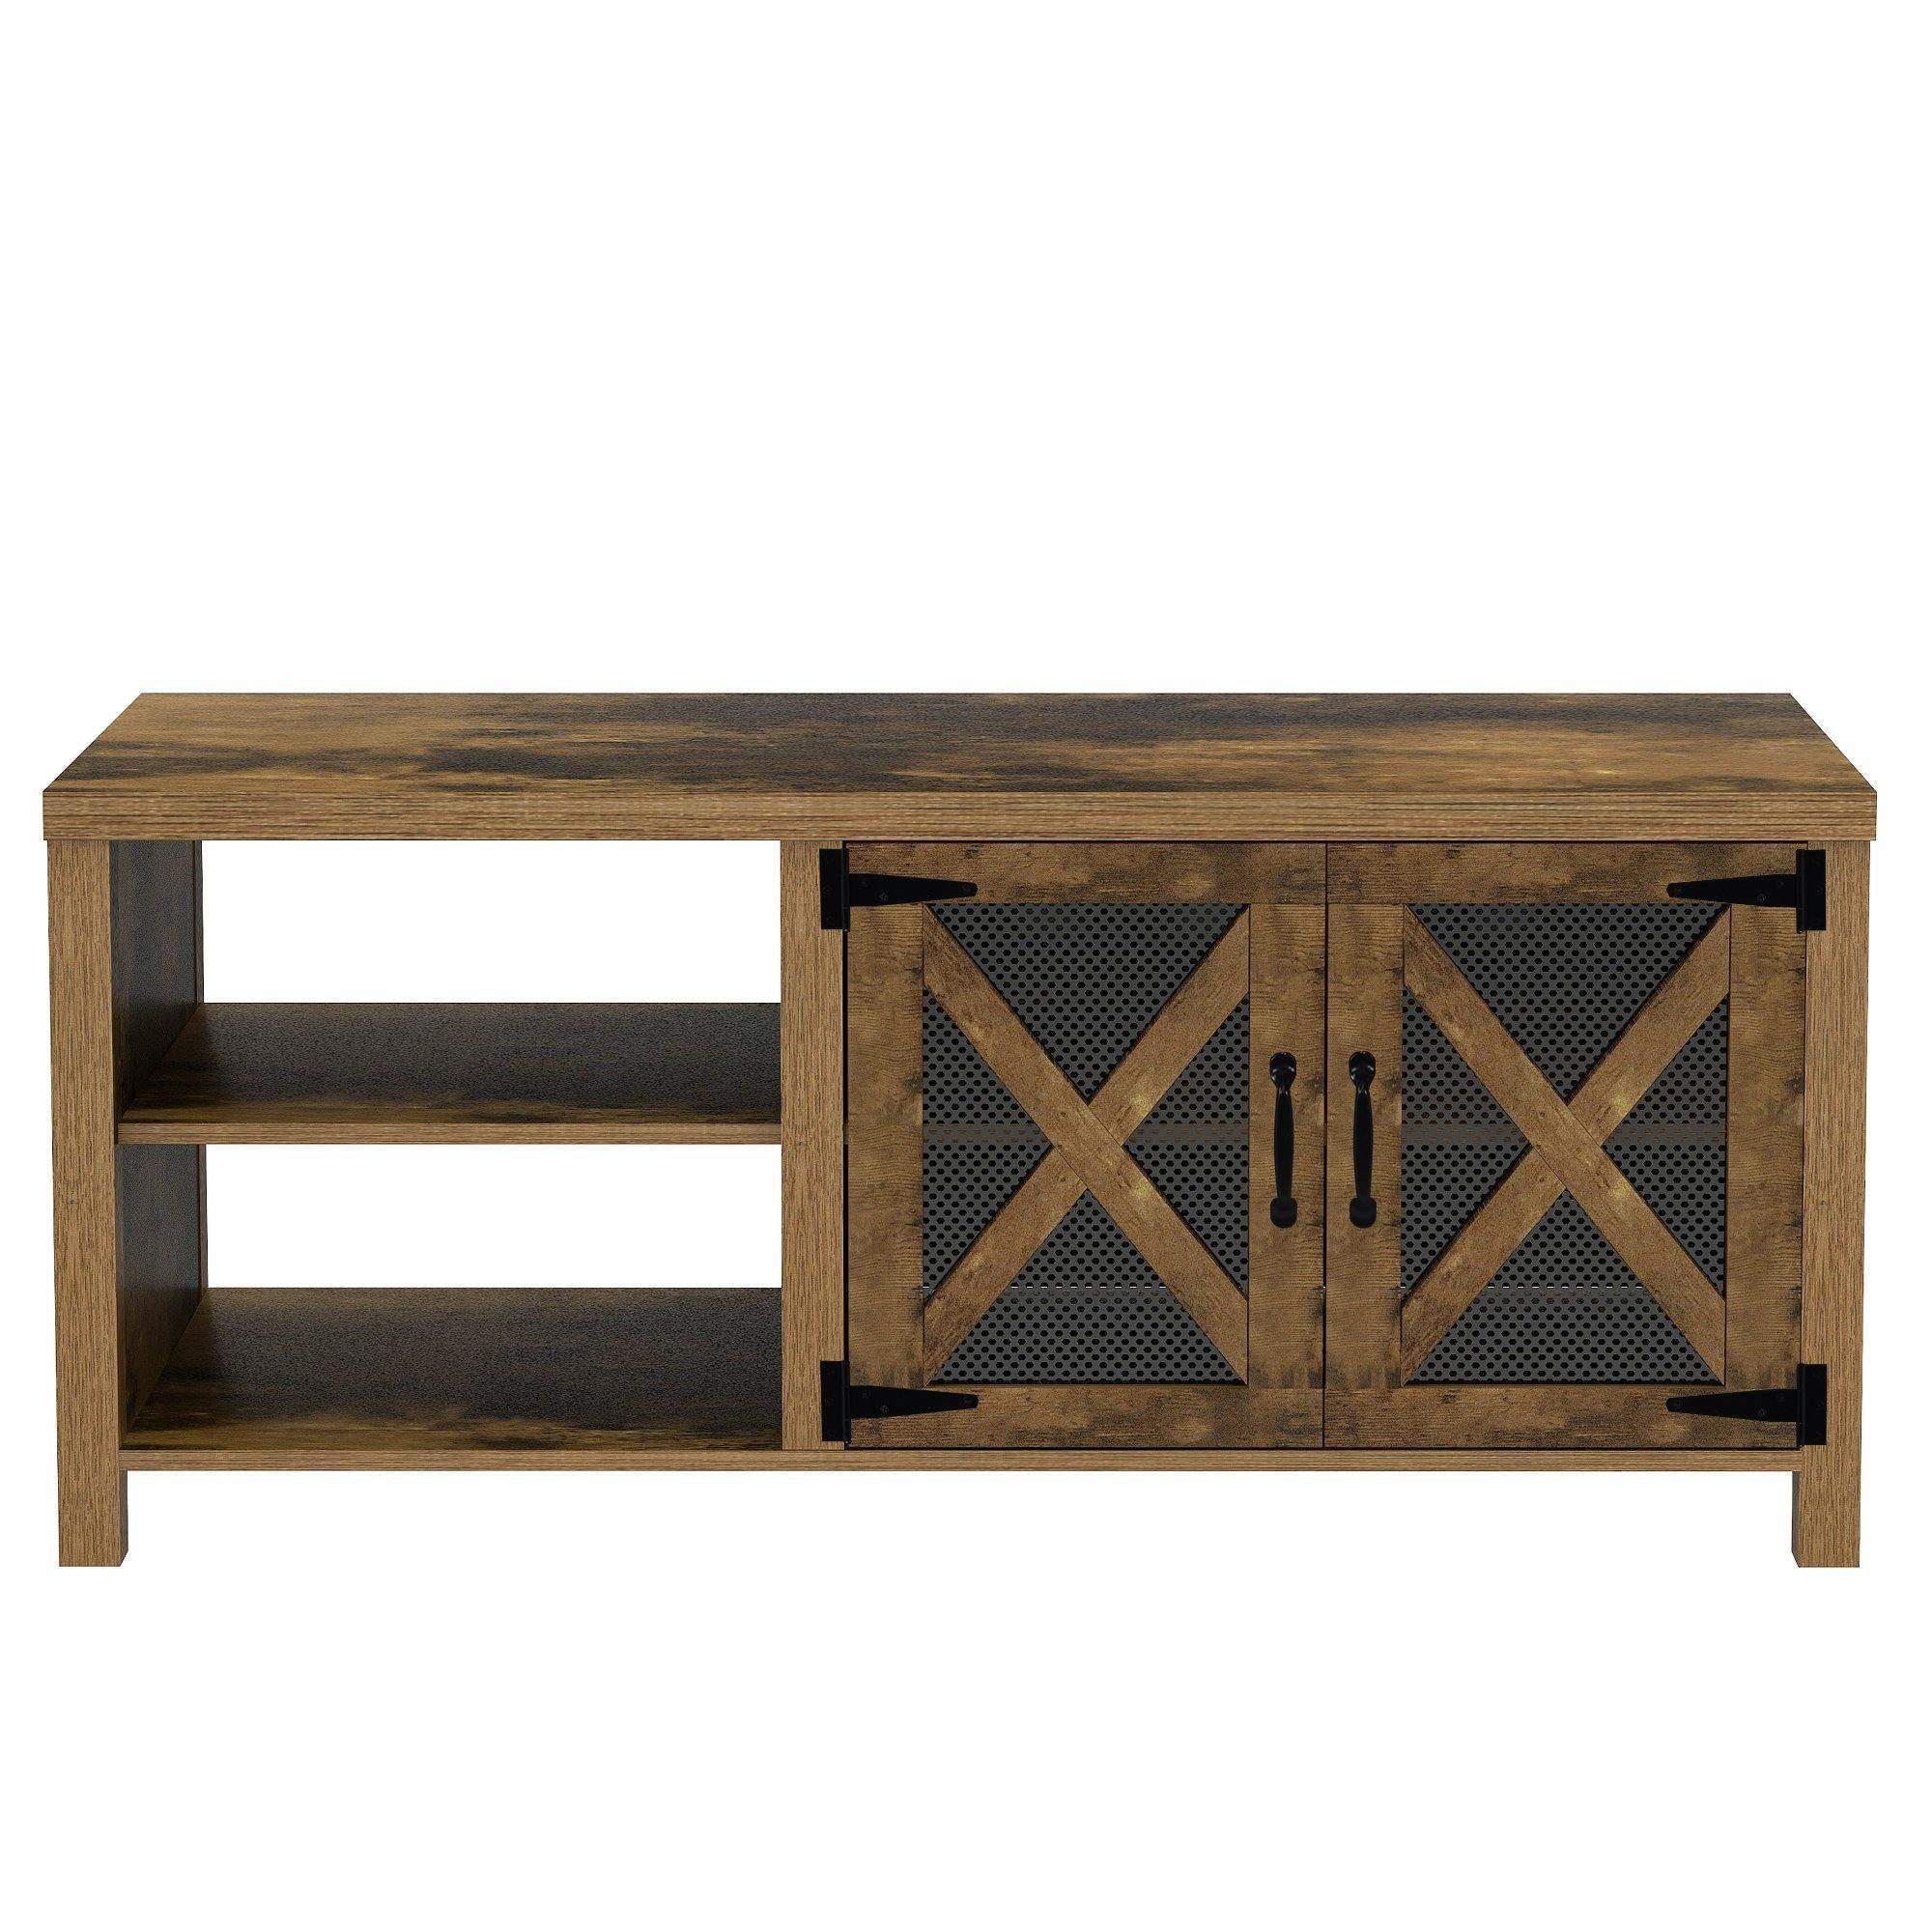 Rustic Style TV Stand For TVs Up To 57 Inches-rustic,TV Stand,TV Stands